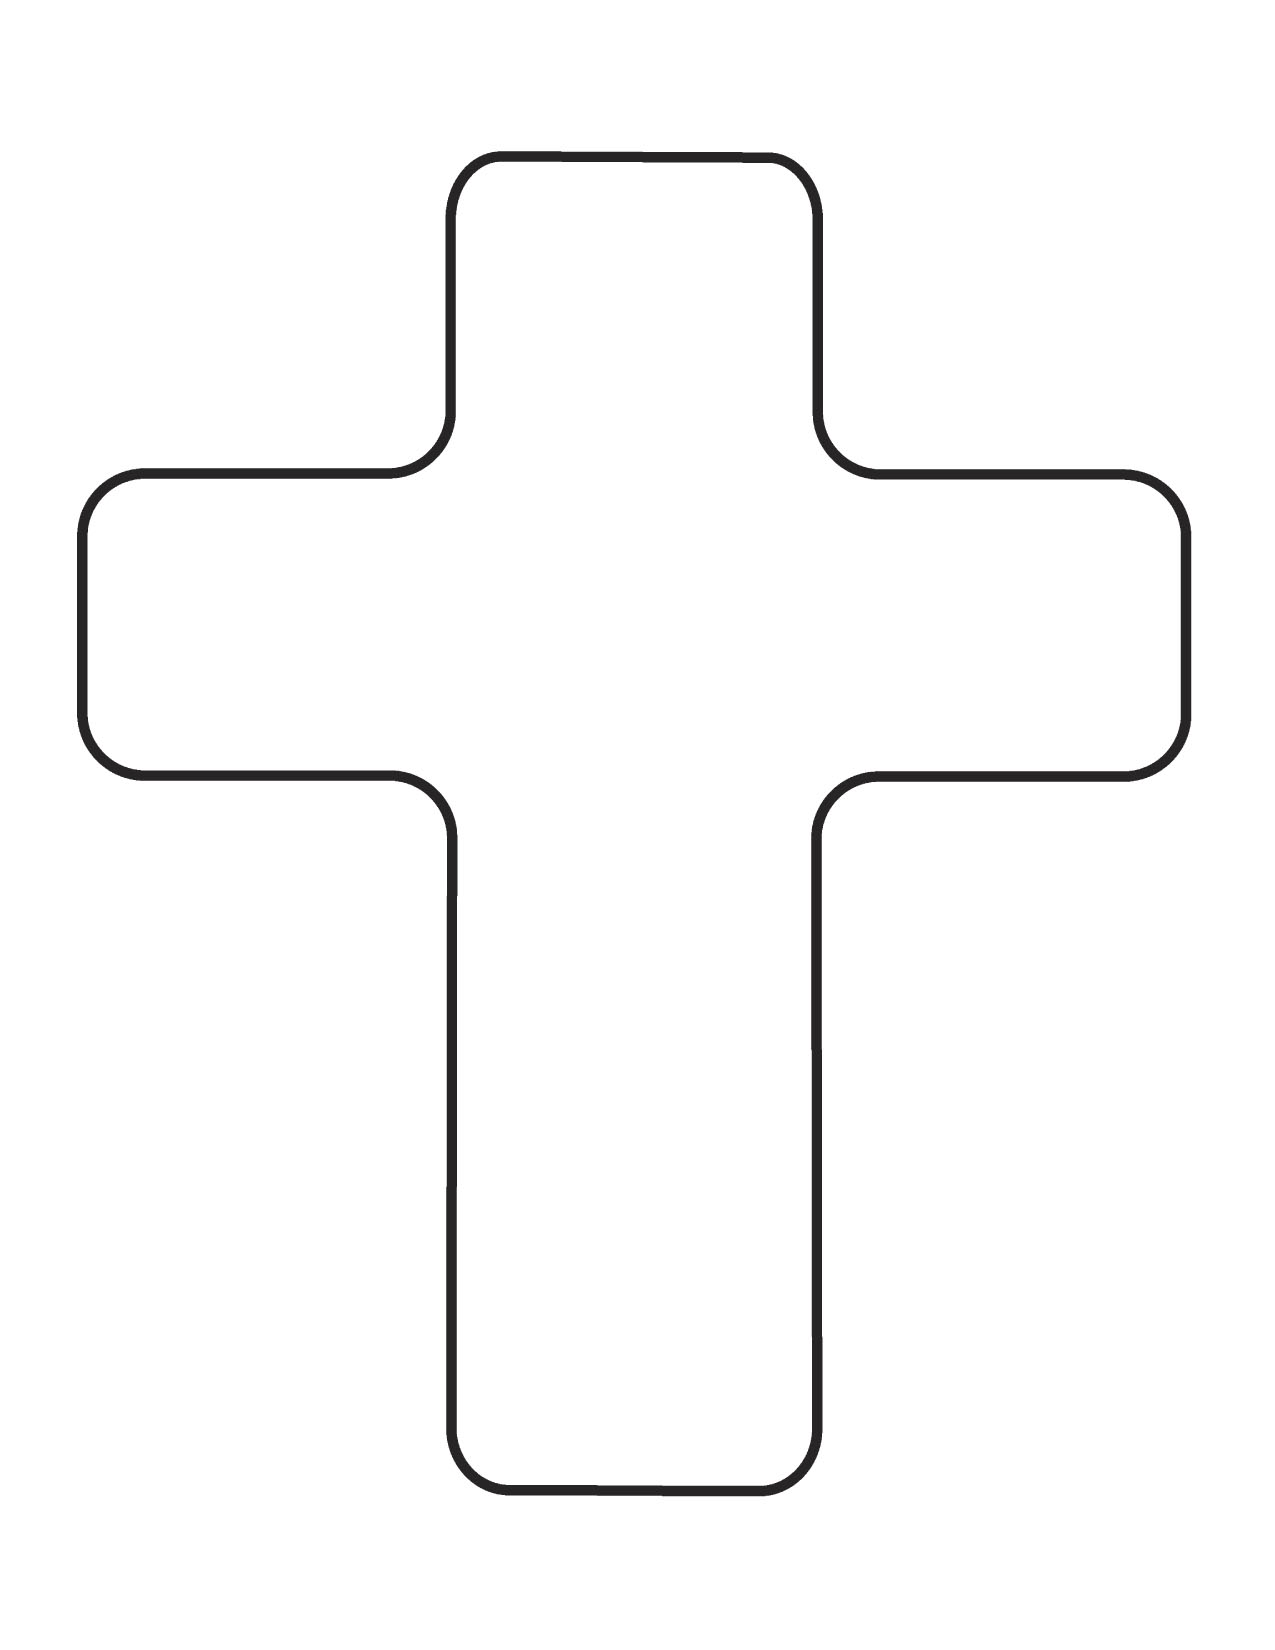 Cross  black and white free cross clipart black and white